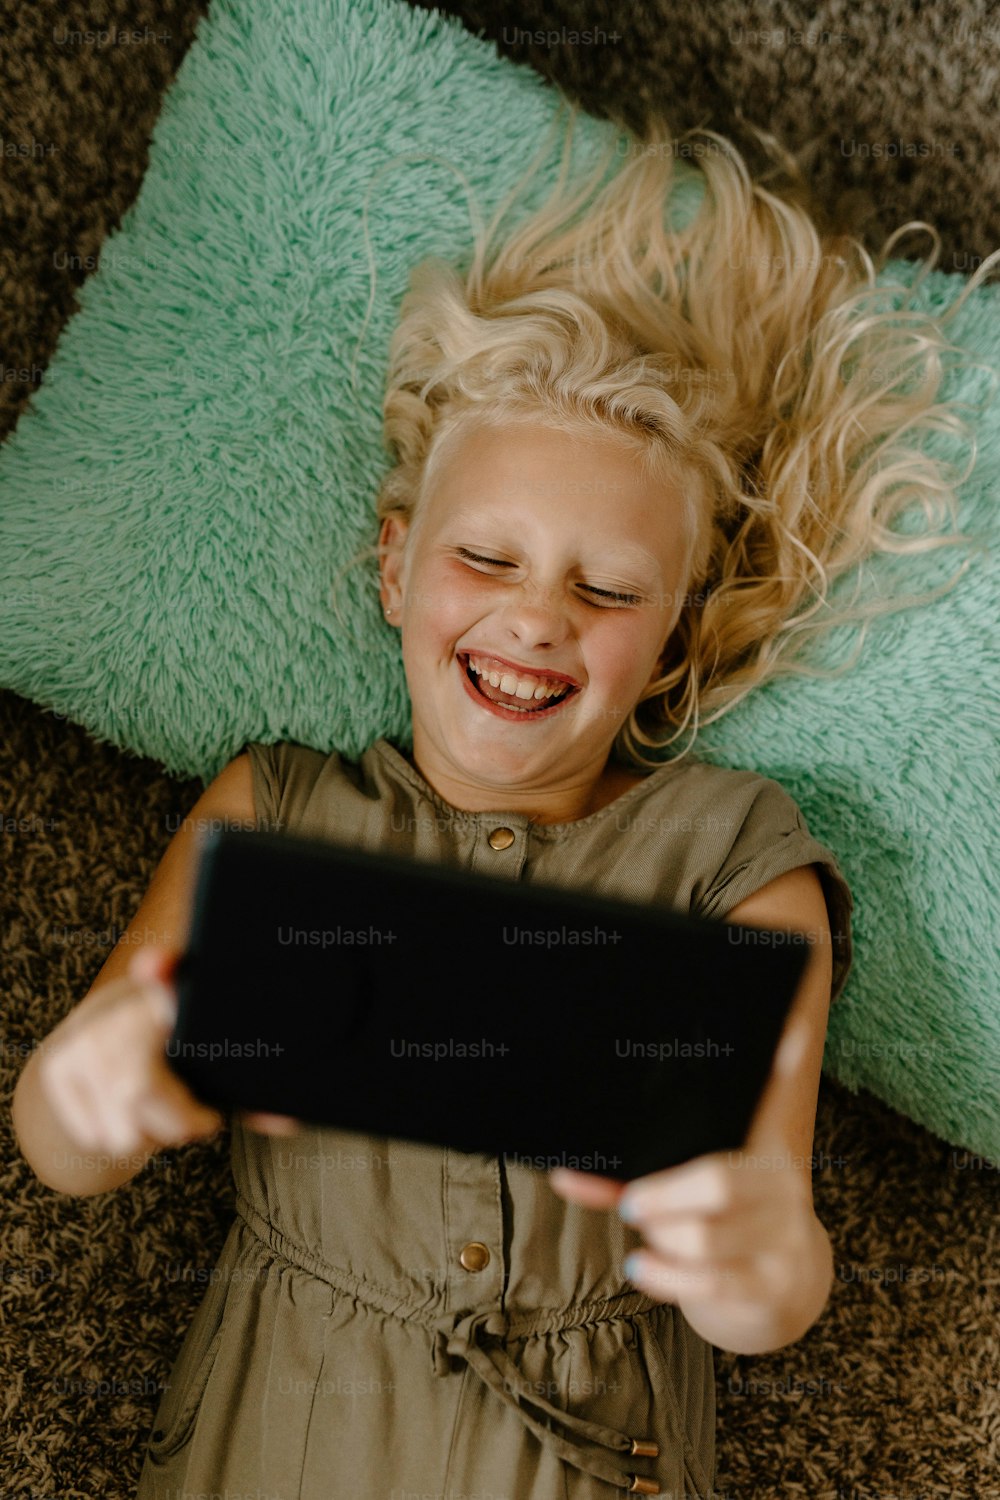 a little girl laying on the floor with a tablet